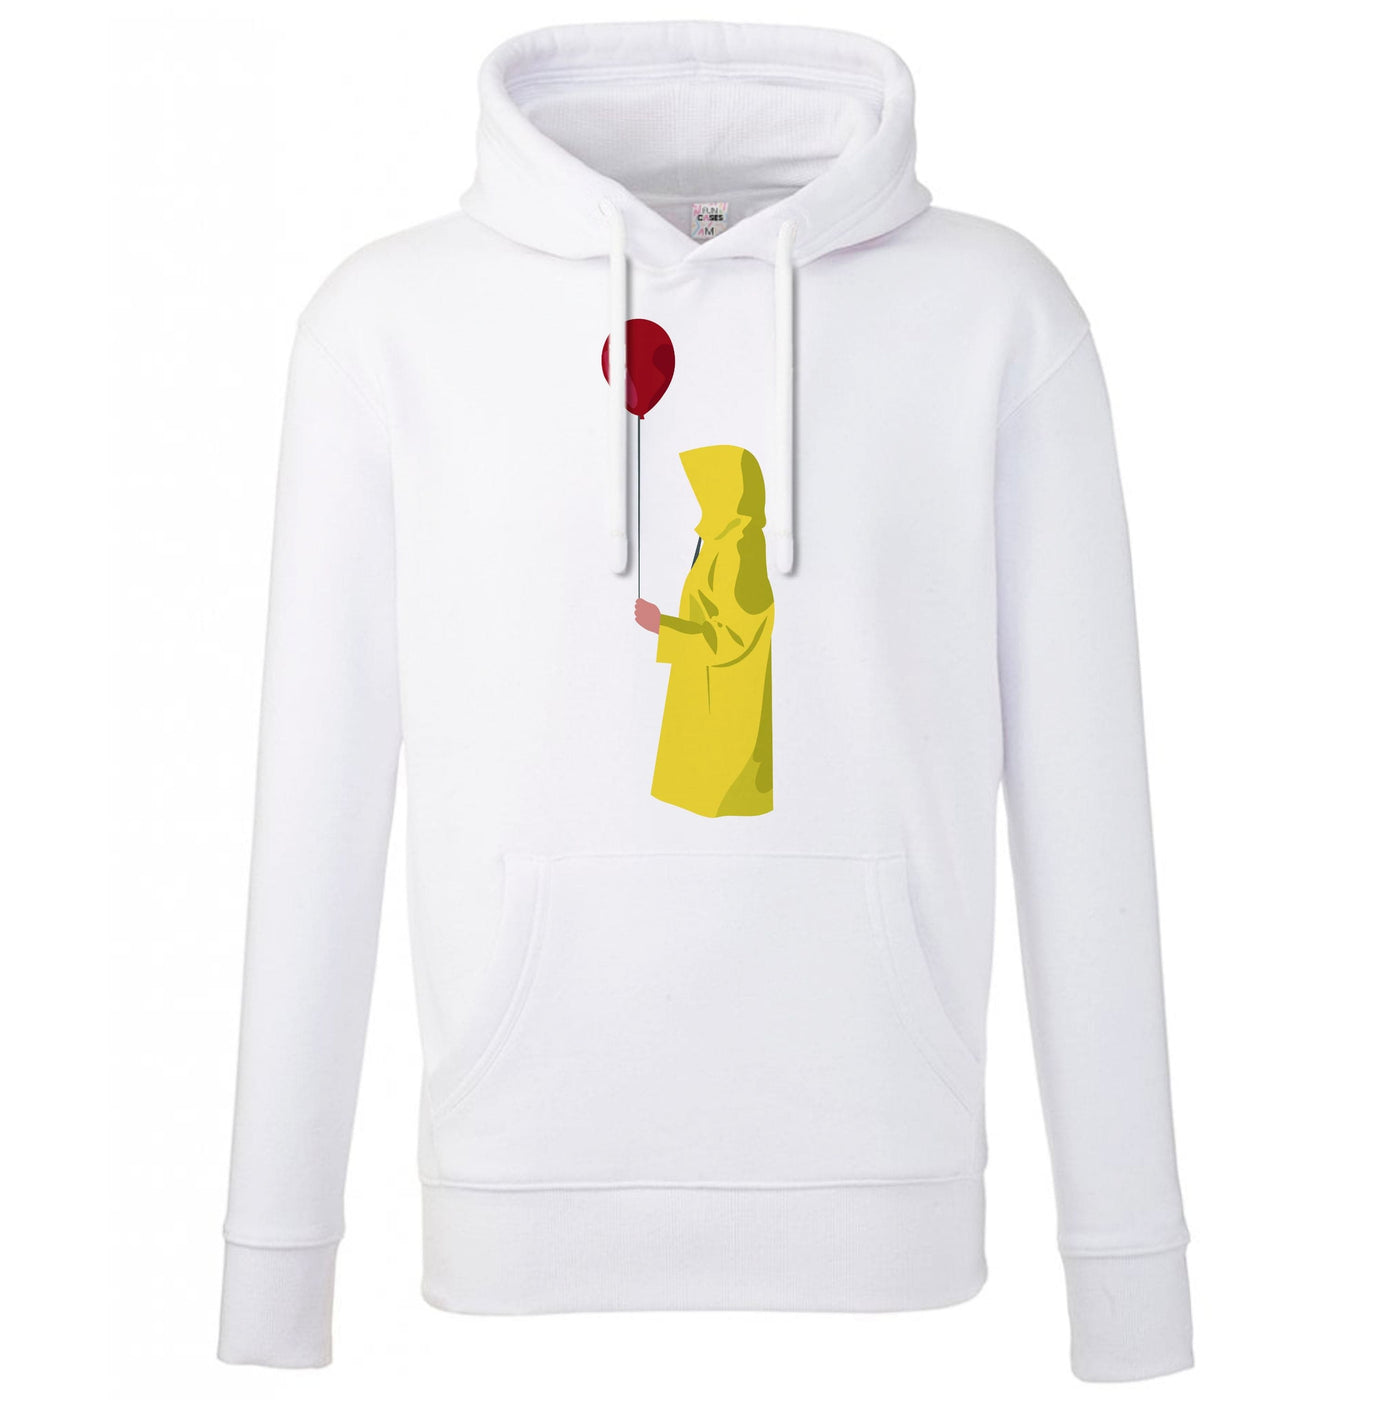 Holding Balloon - IT The Clown Hoodie